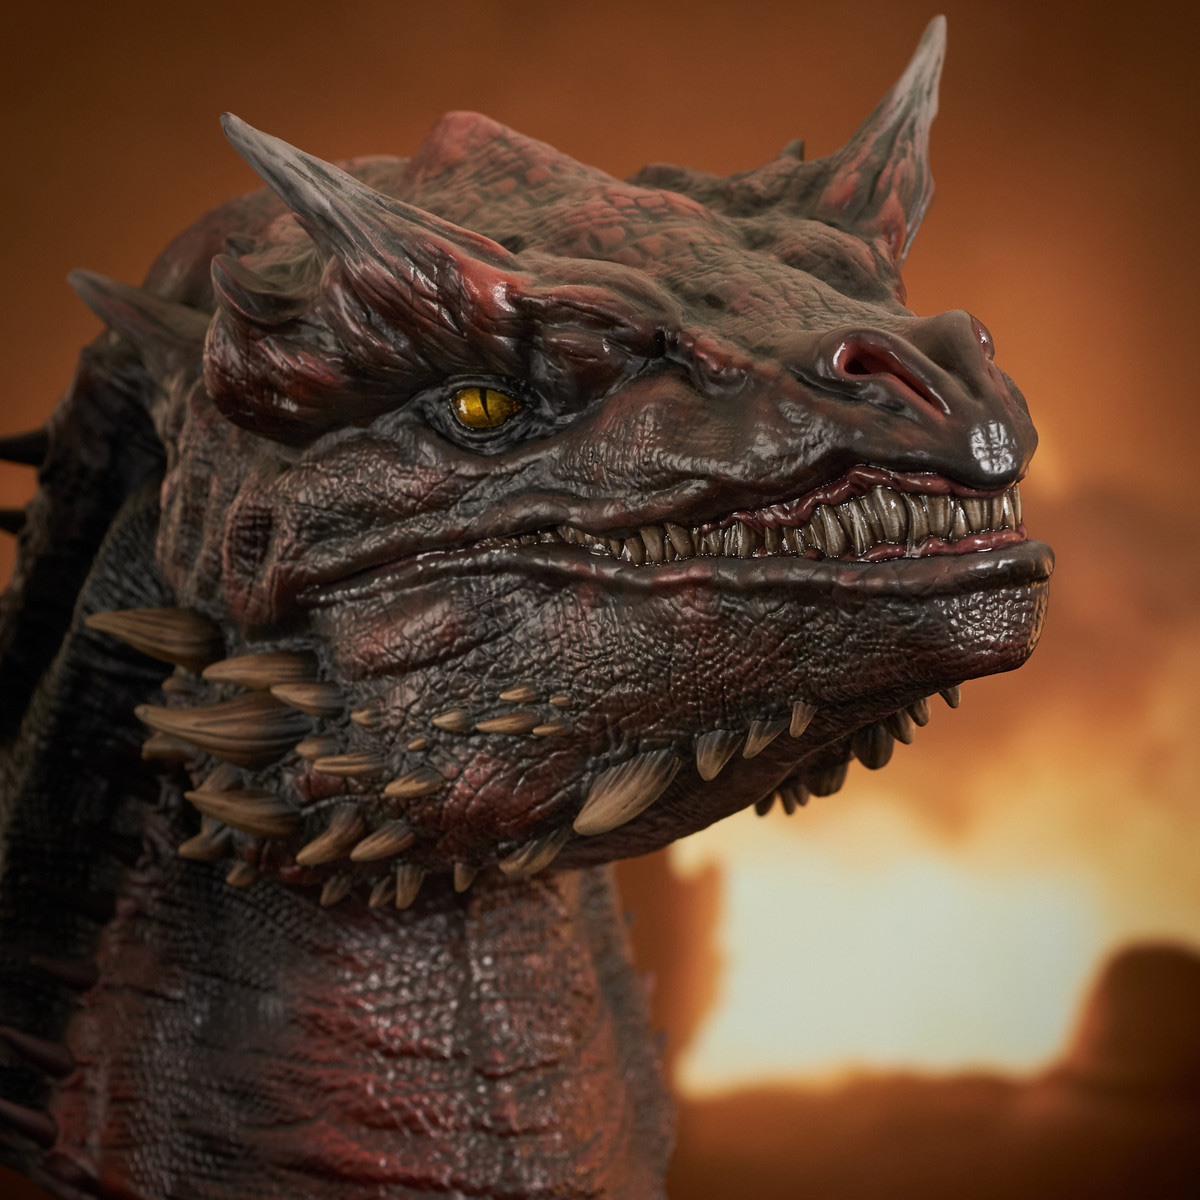 Bust Caraxes Legends in 3D, Daemon Targaryen's Dragon in House of the Dragon